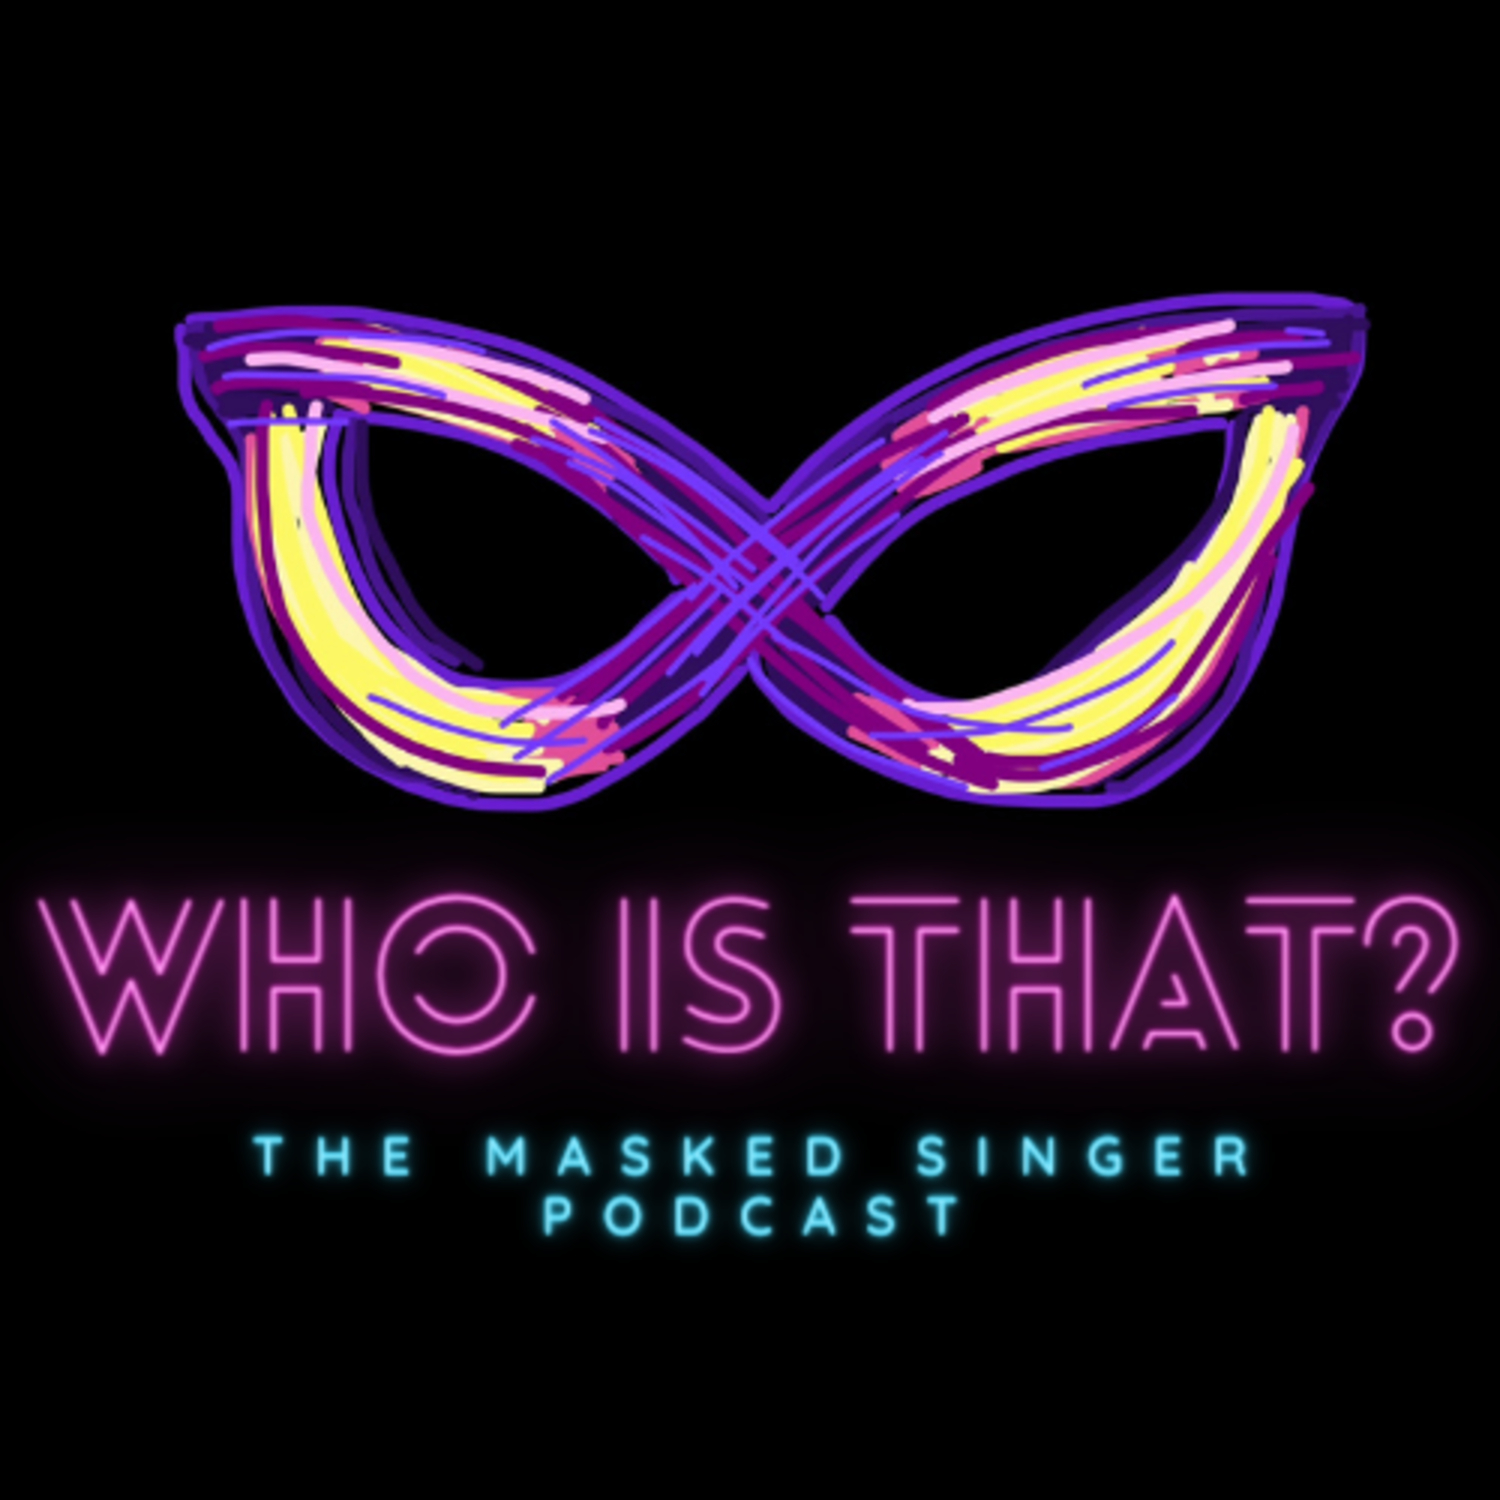 Who Is That? The Masked Singer Podcast